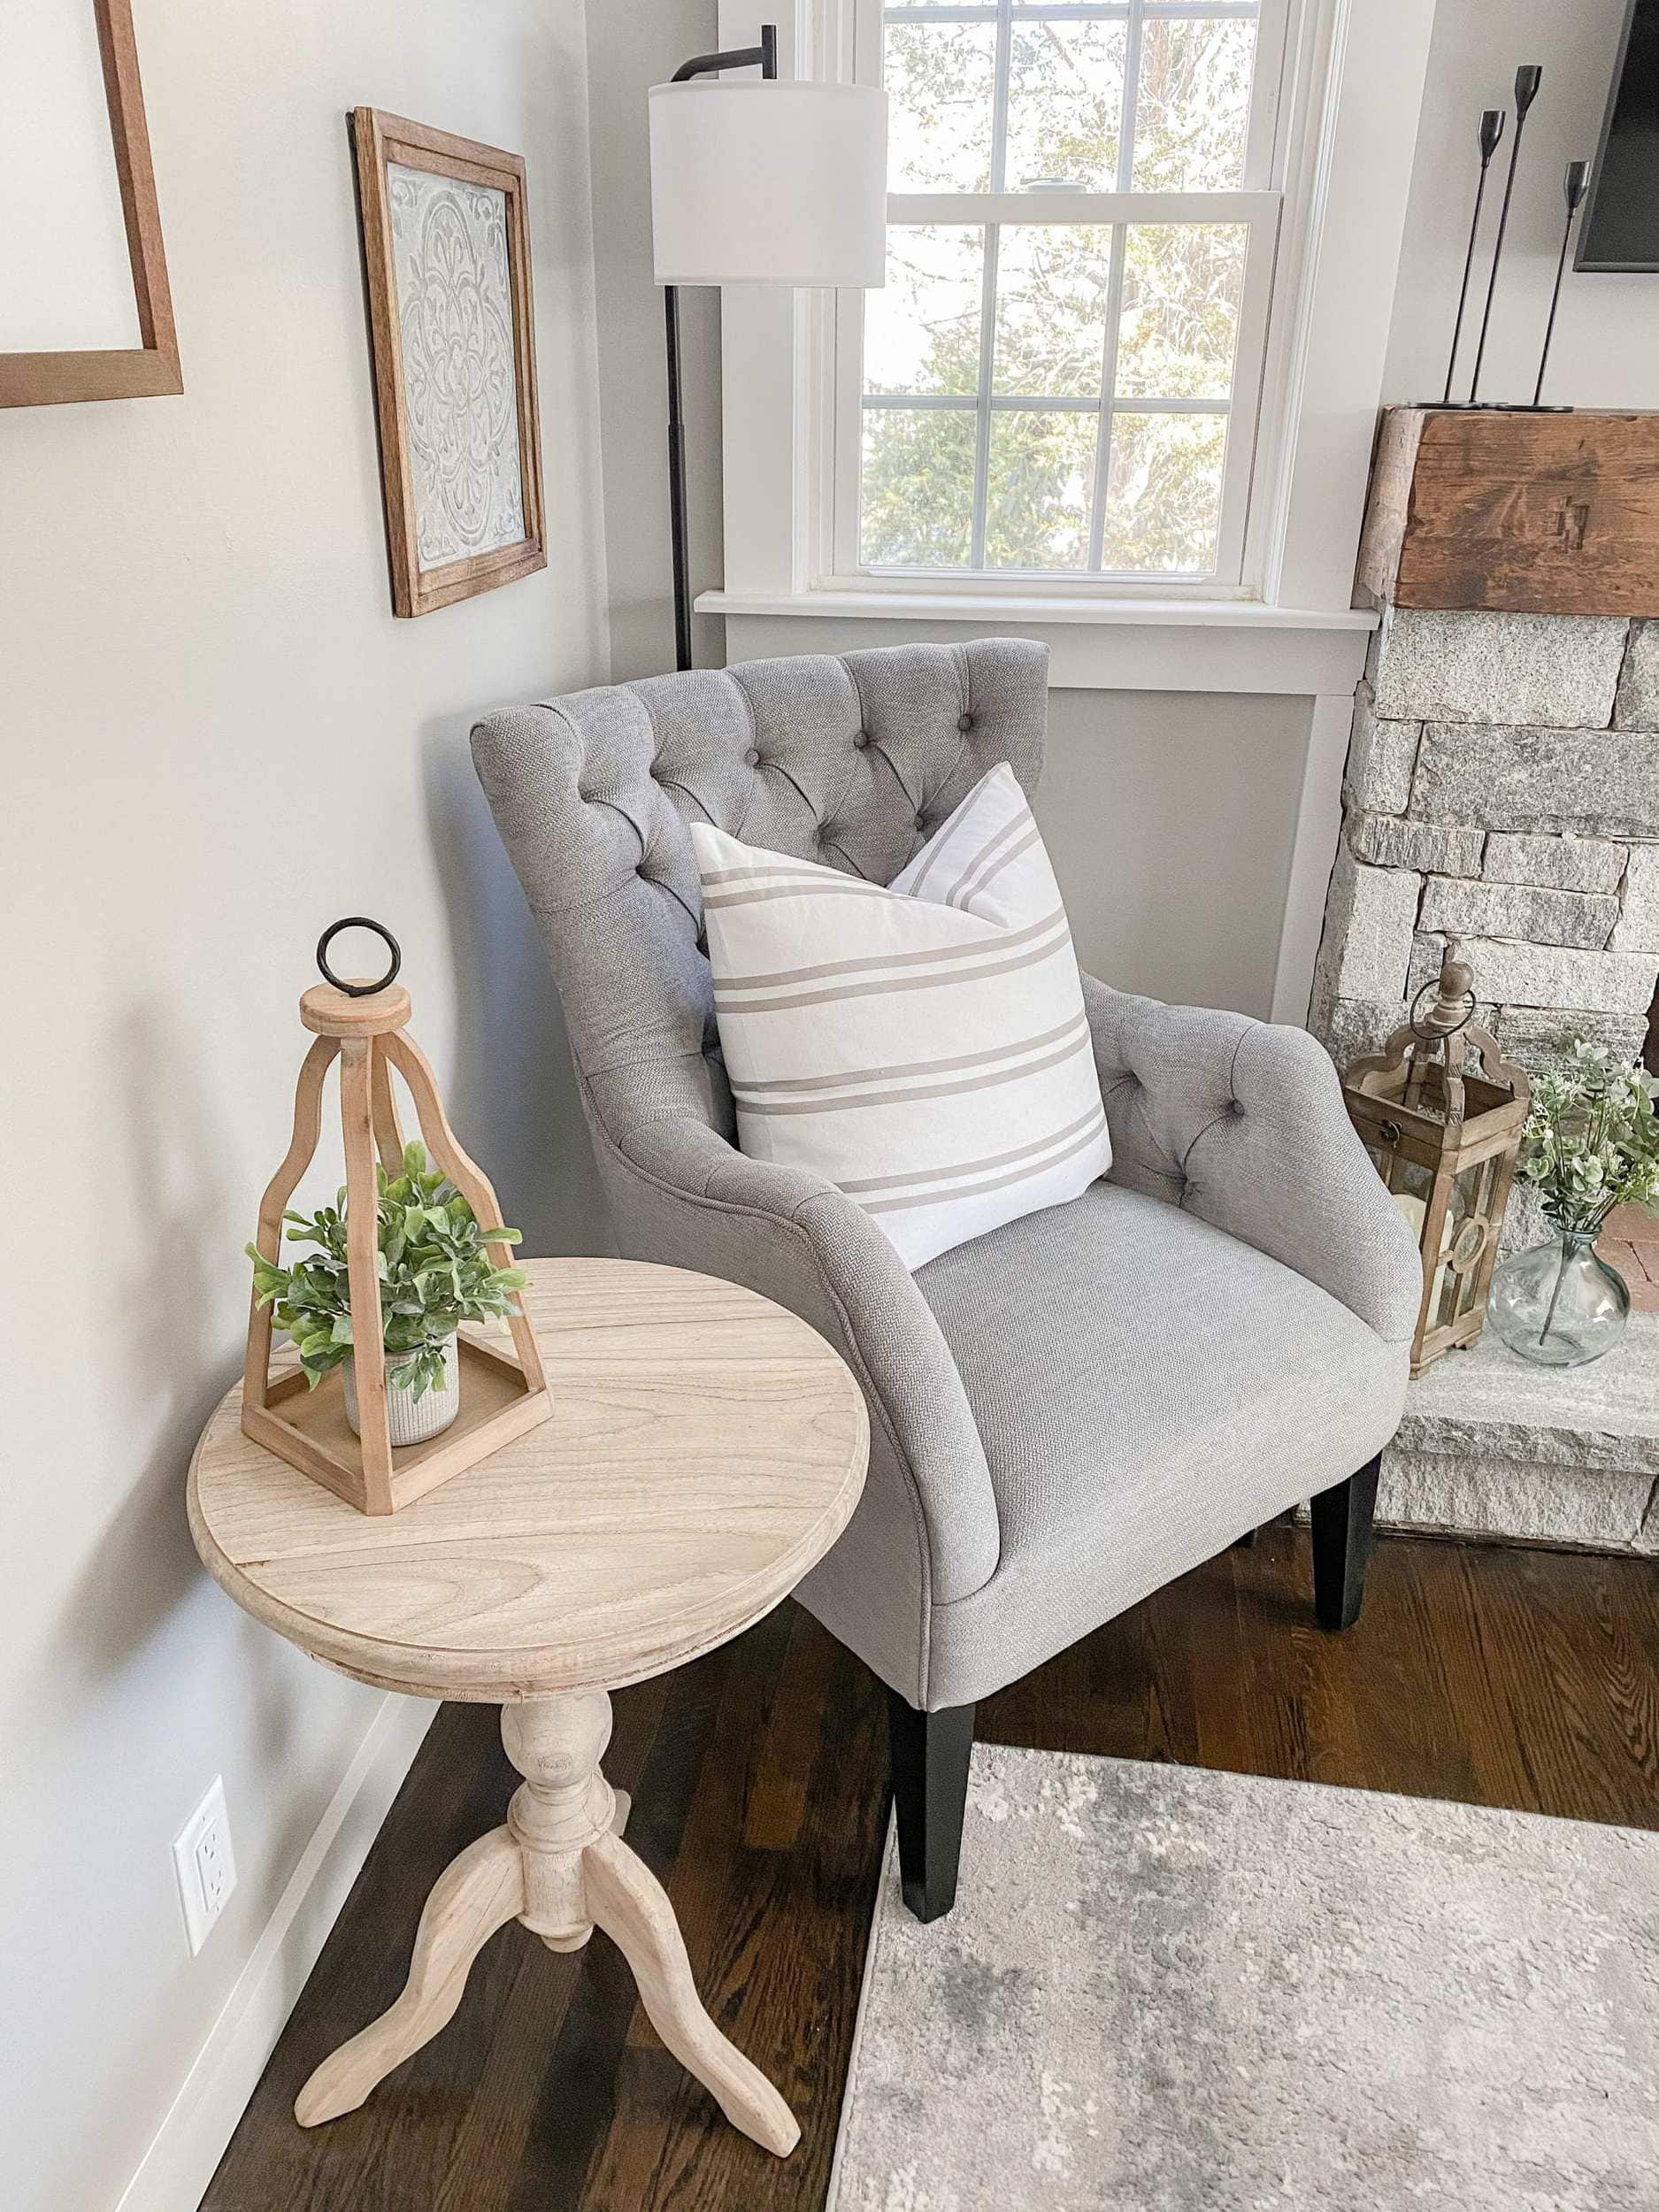 grey tufted armchair, unfinished wood table, lamp, and farmhouse wall decor